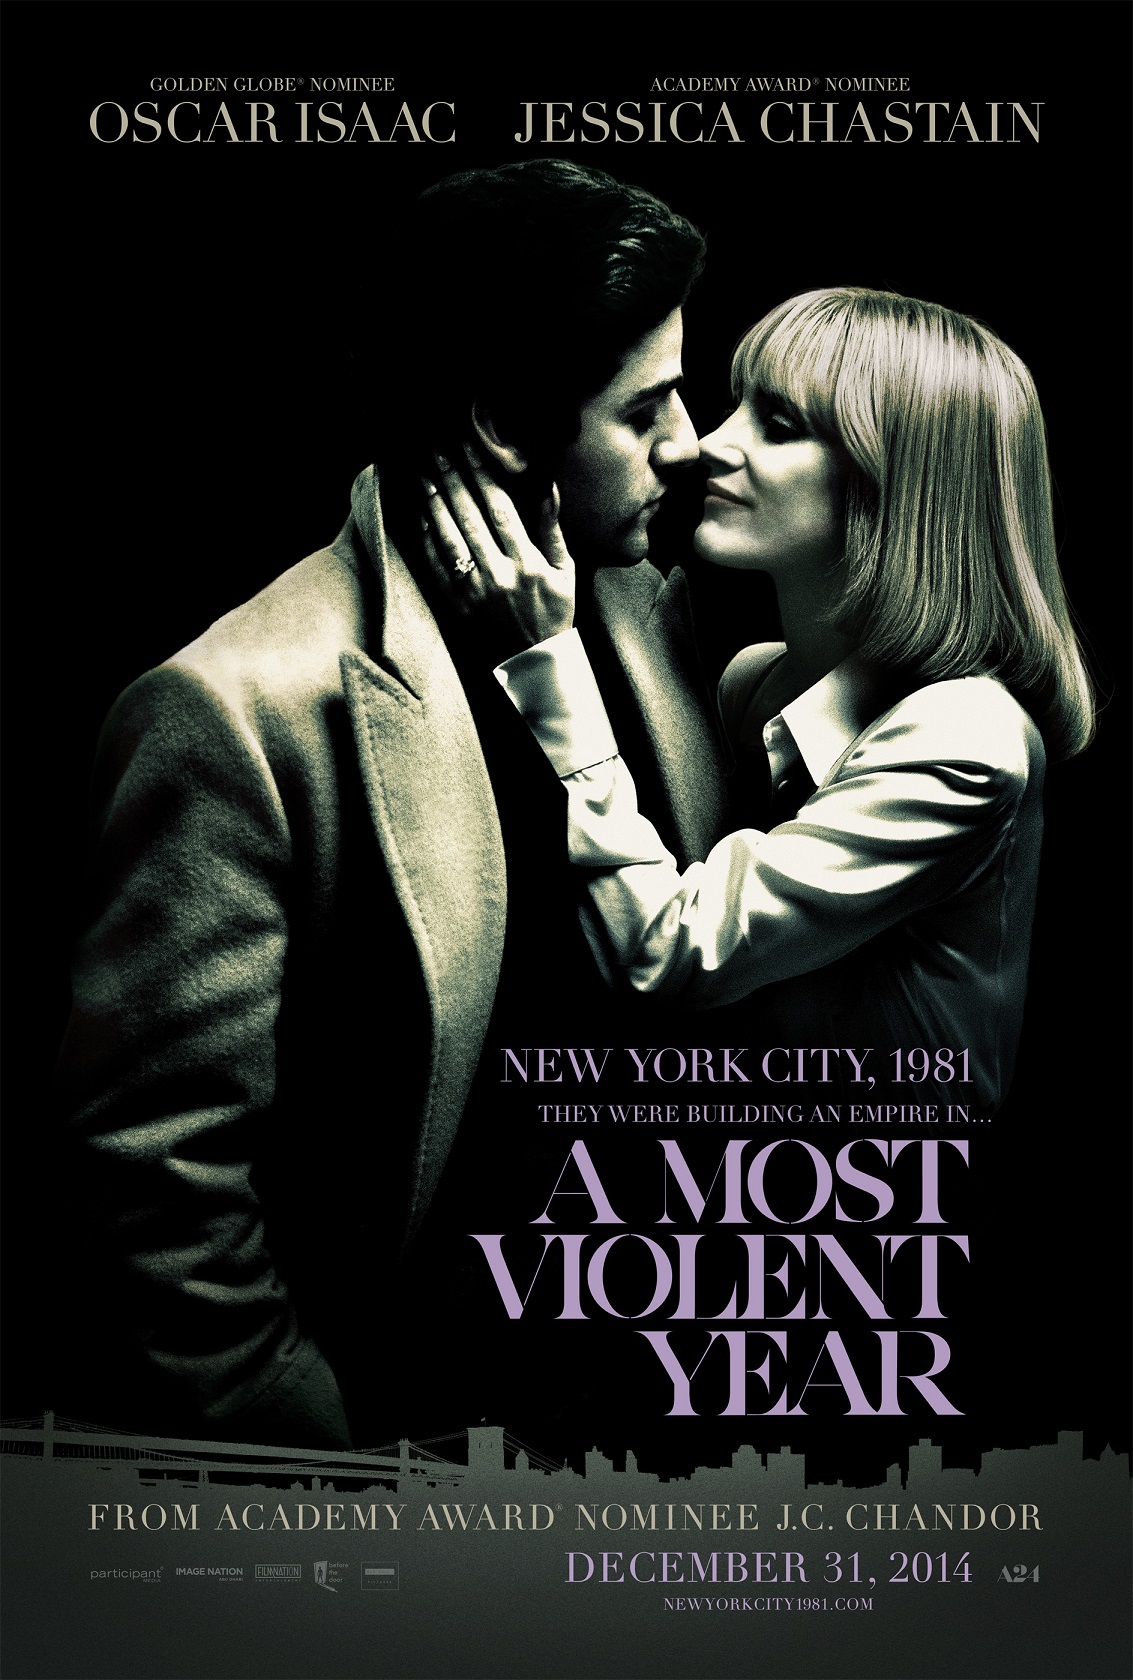 Finally! “A Most Violent Year” Trailer to Consume